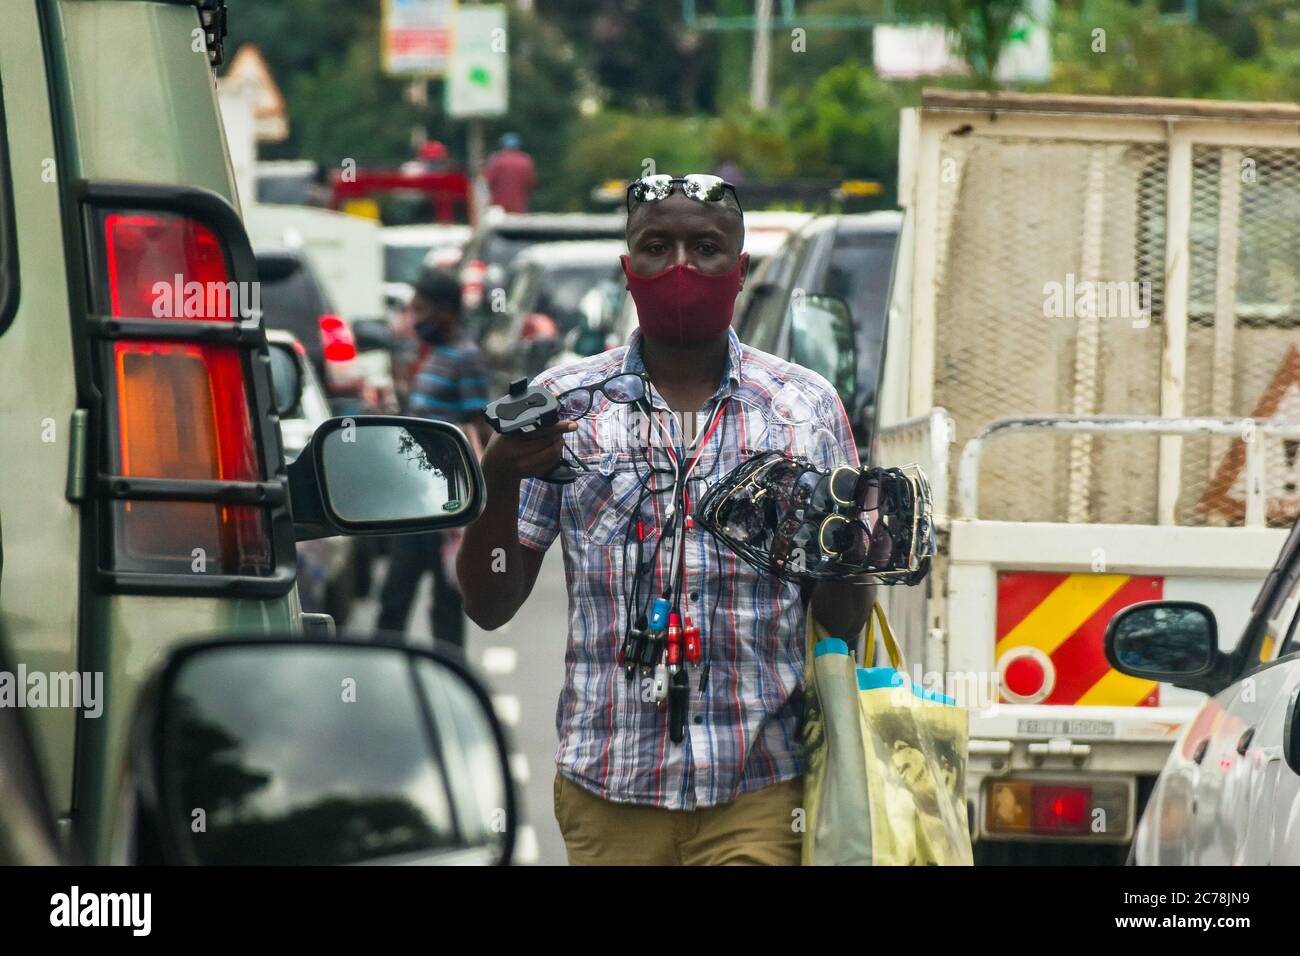 A street hawker wearing a face mask walks past vehicles stuck in traffic selling sunglasses and other goods, Nairobi, Kenya Stock Photo